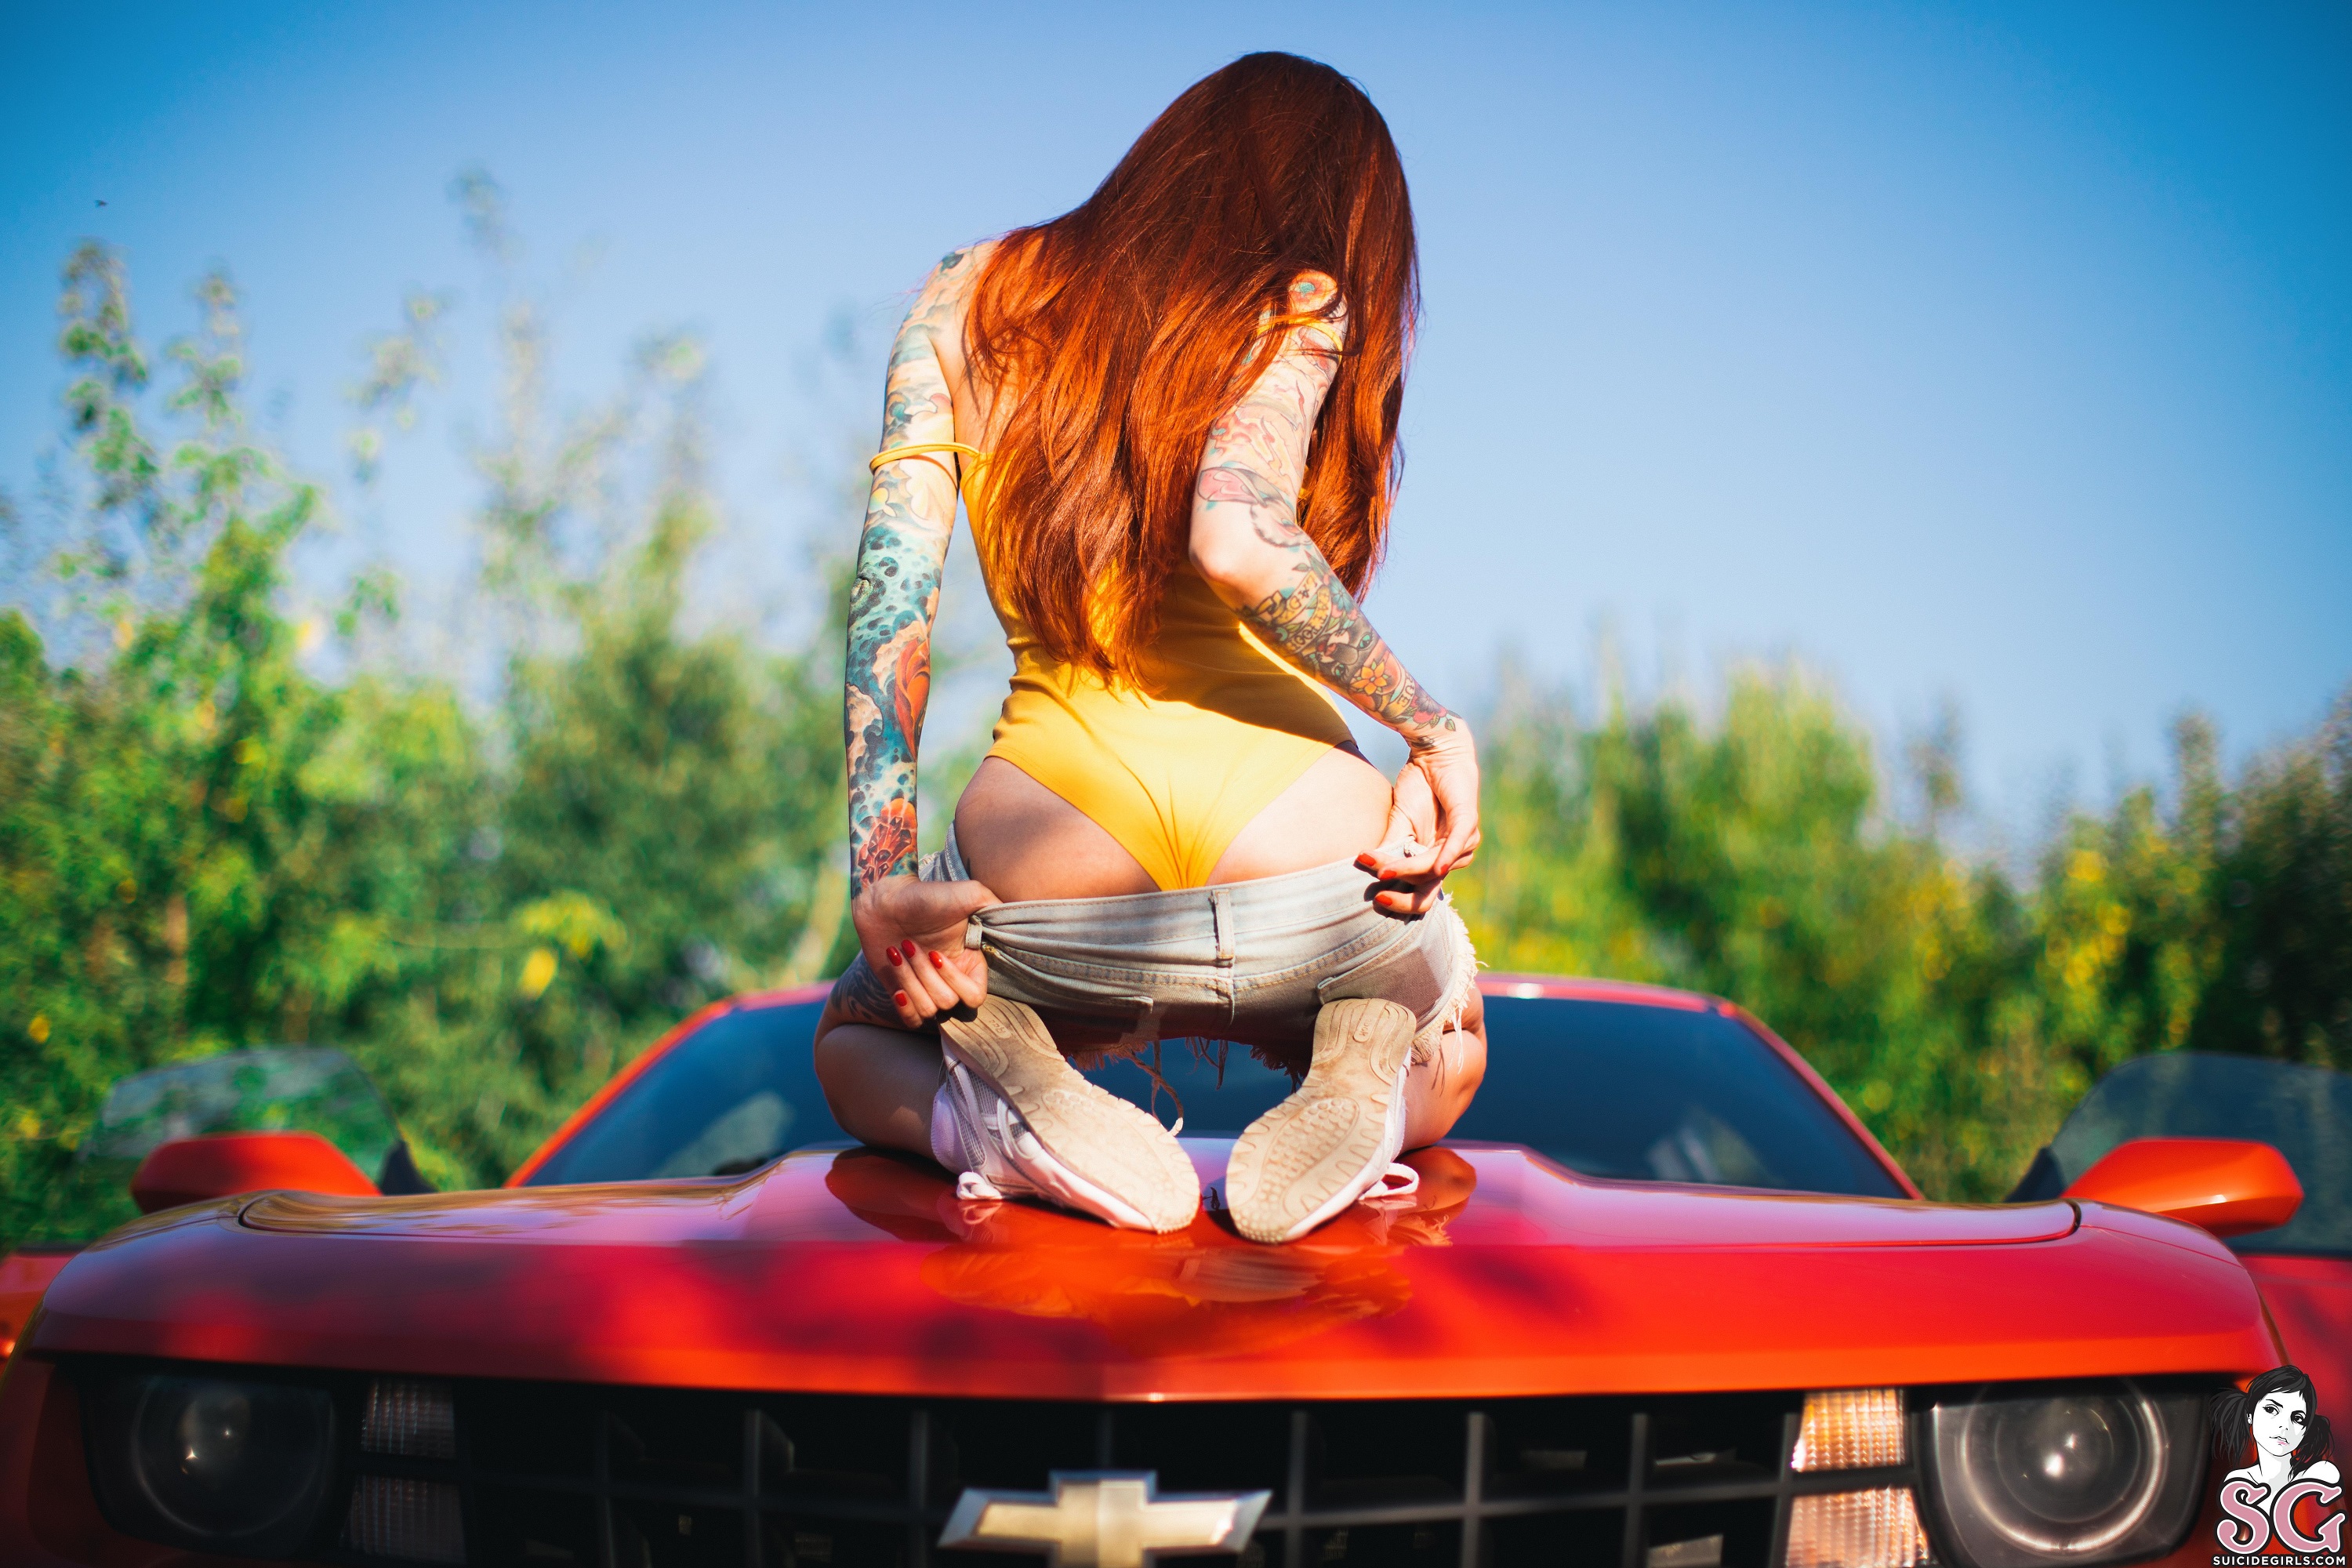 People 3000x2000 Elune_ Suicide women model redhead long hair back bodysuit monokinis ass jean shorts kneeling sneakers depth of field Chevrolet Chevrolet Camaro car red cars vehicle women with cars inked girls tattoo outdoors women outdoors Suicide Girls muscle cars American cars